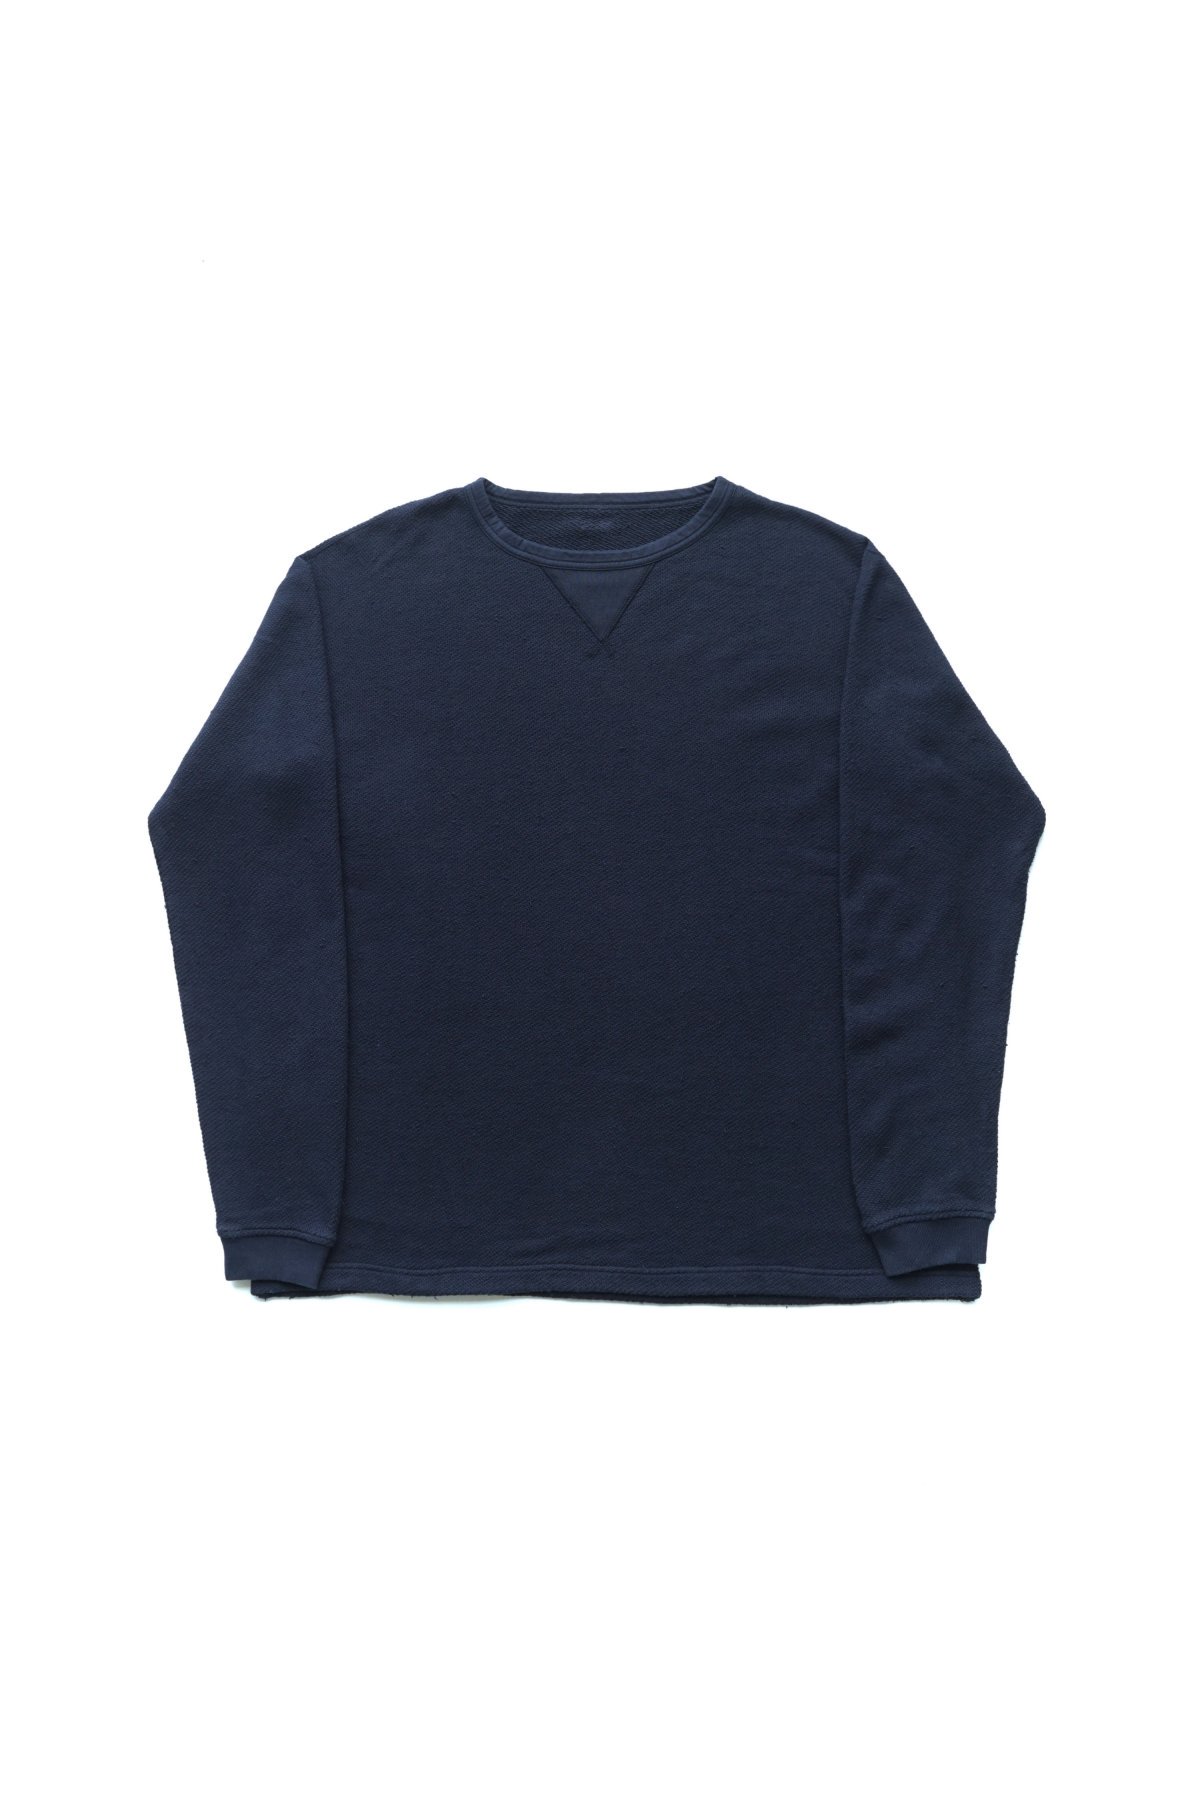 Porter Classic - FRENCH THERMAL CREWNECK - BLUE ポータークラシック